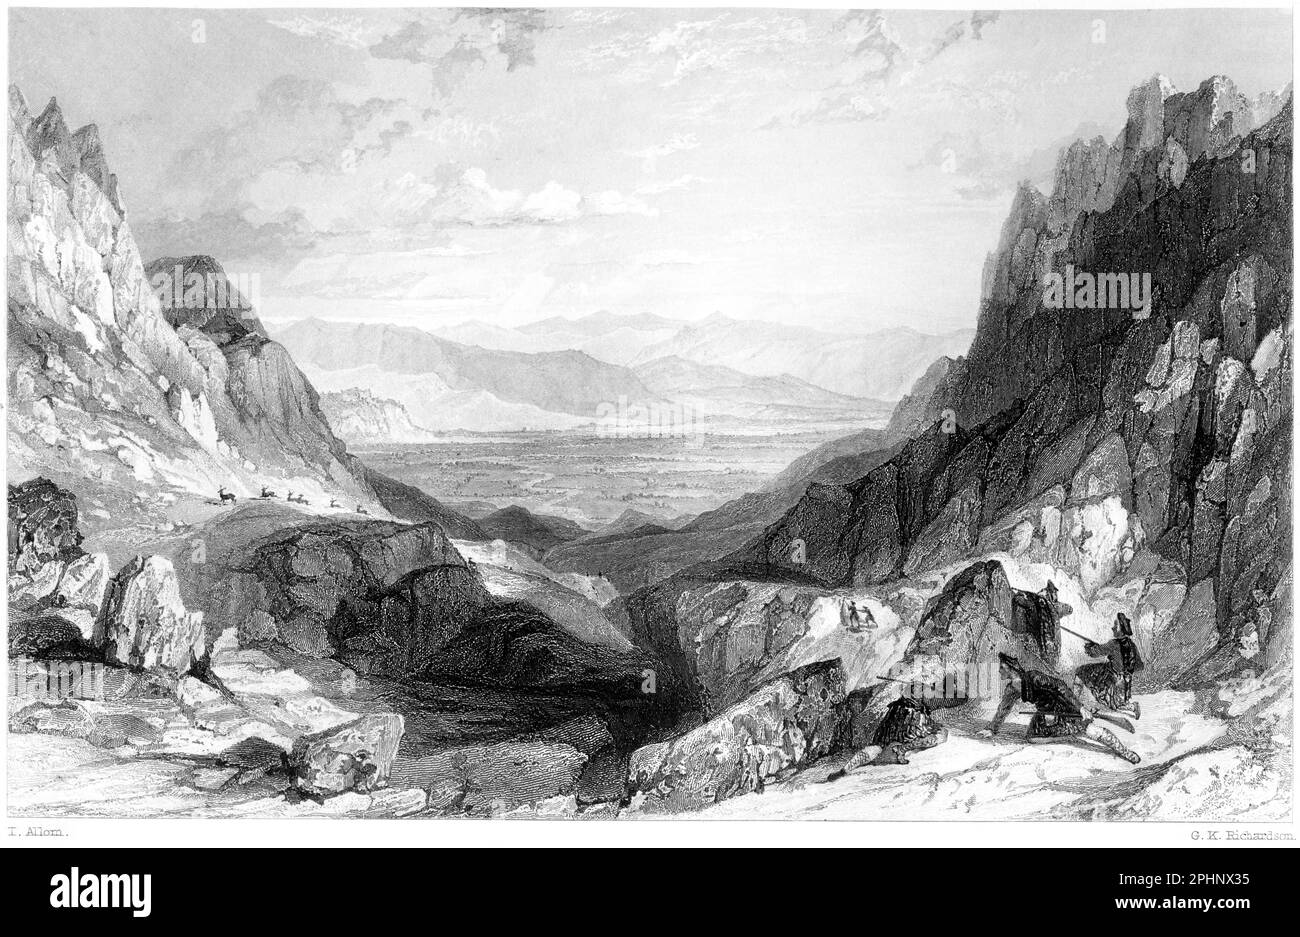 An engraving of the Pass of Cairn Gorm looking towards Aviemore, Inverness-shire, Scotland UK scanned at high resolution from a book printed in 1840. Stock Photo